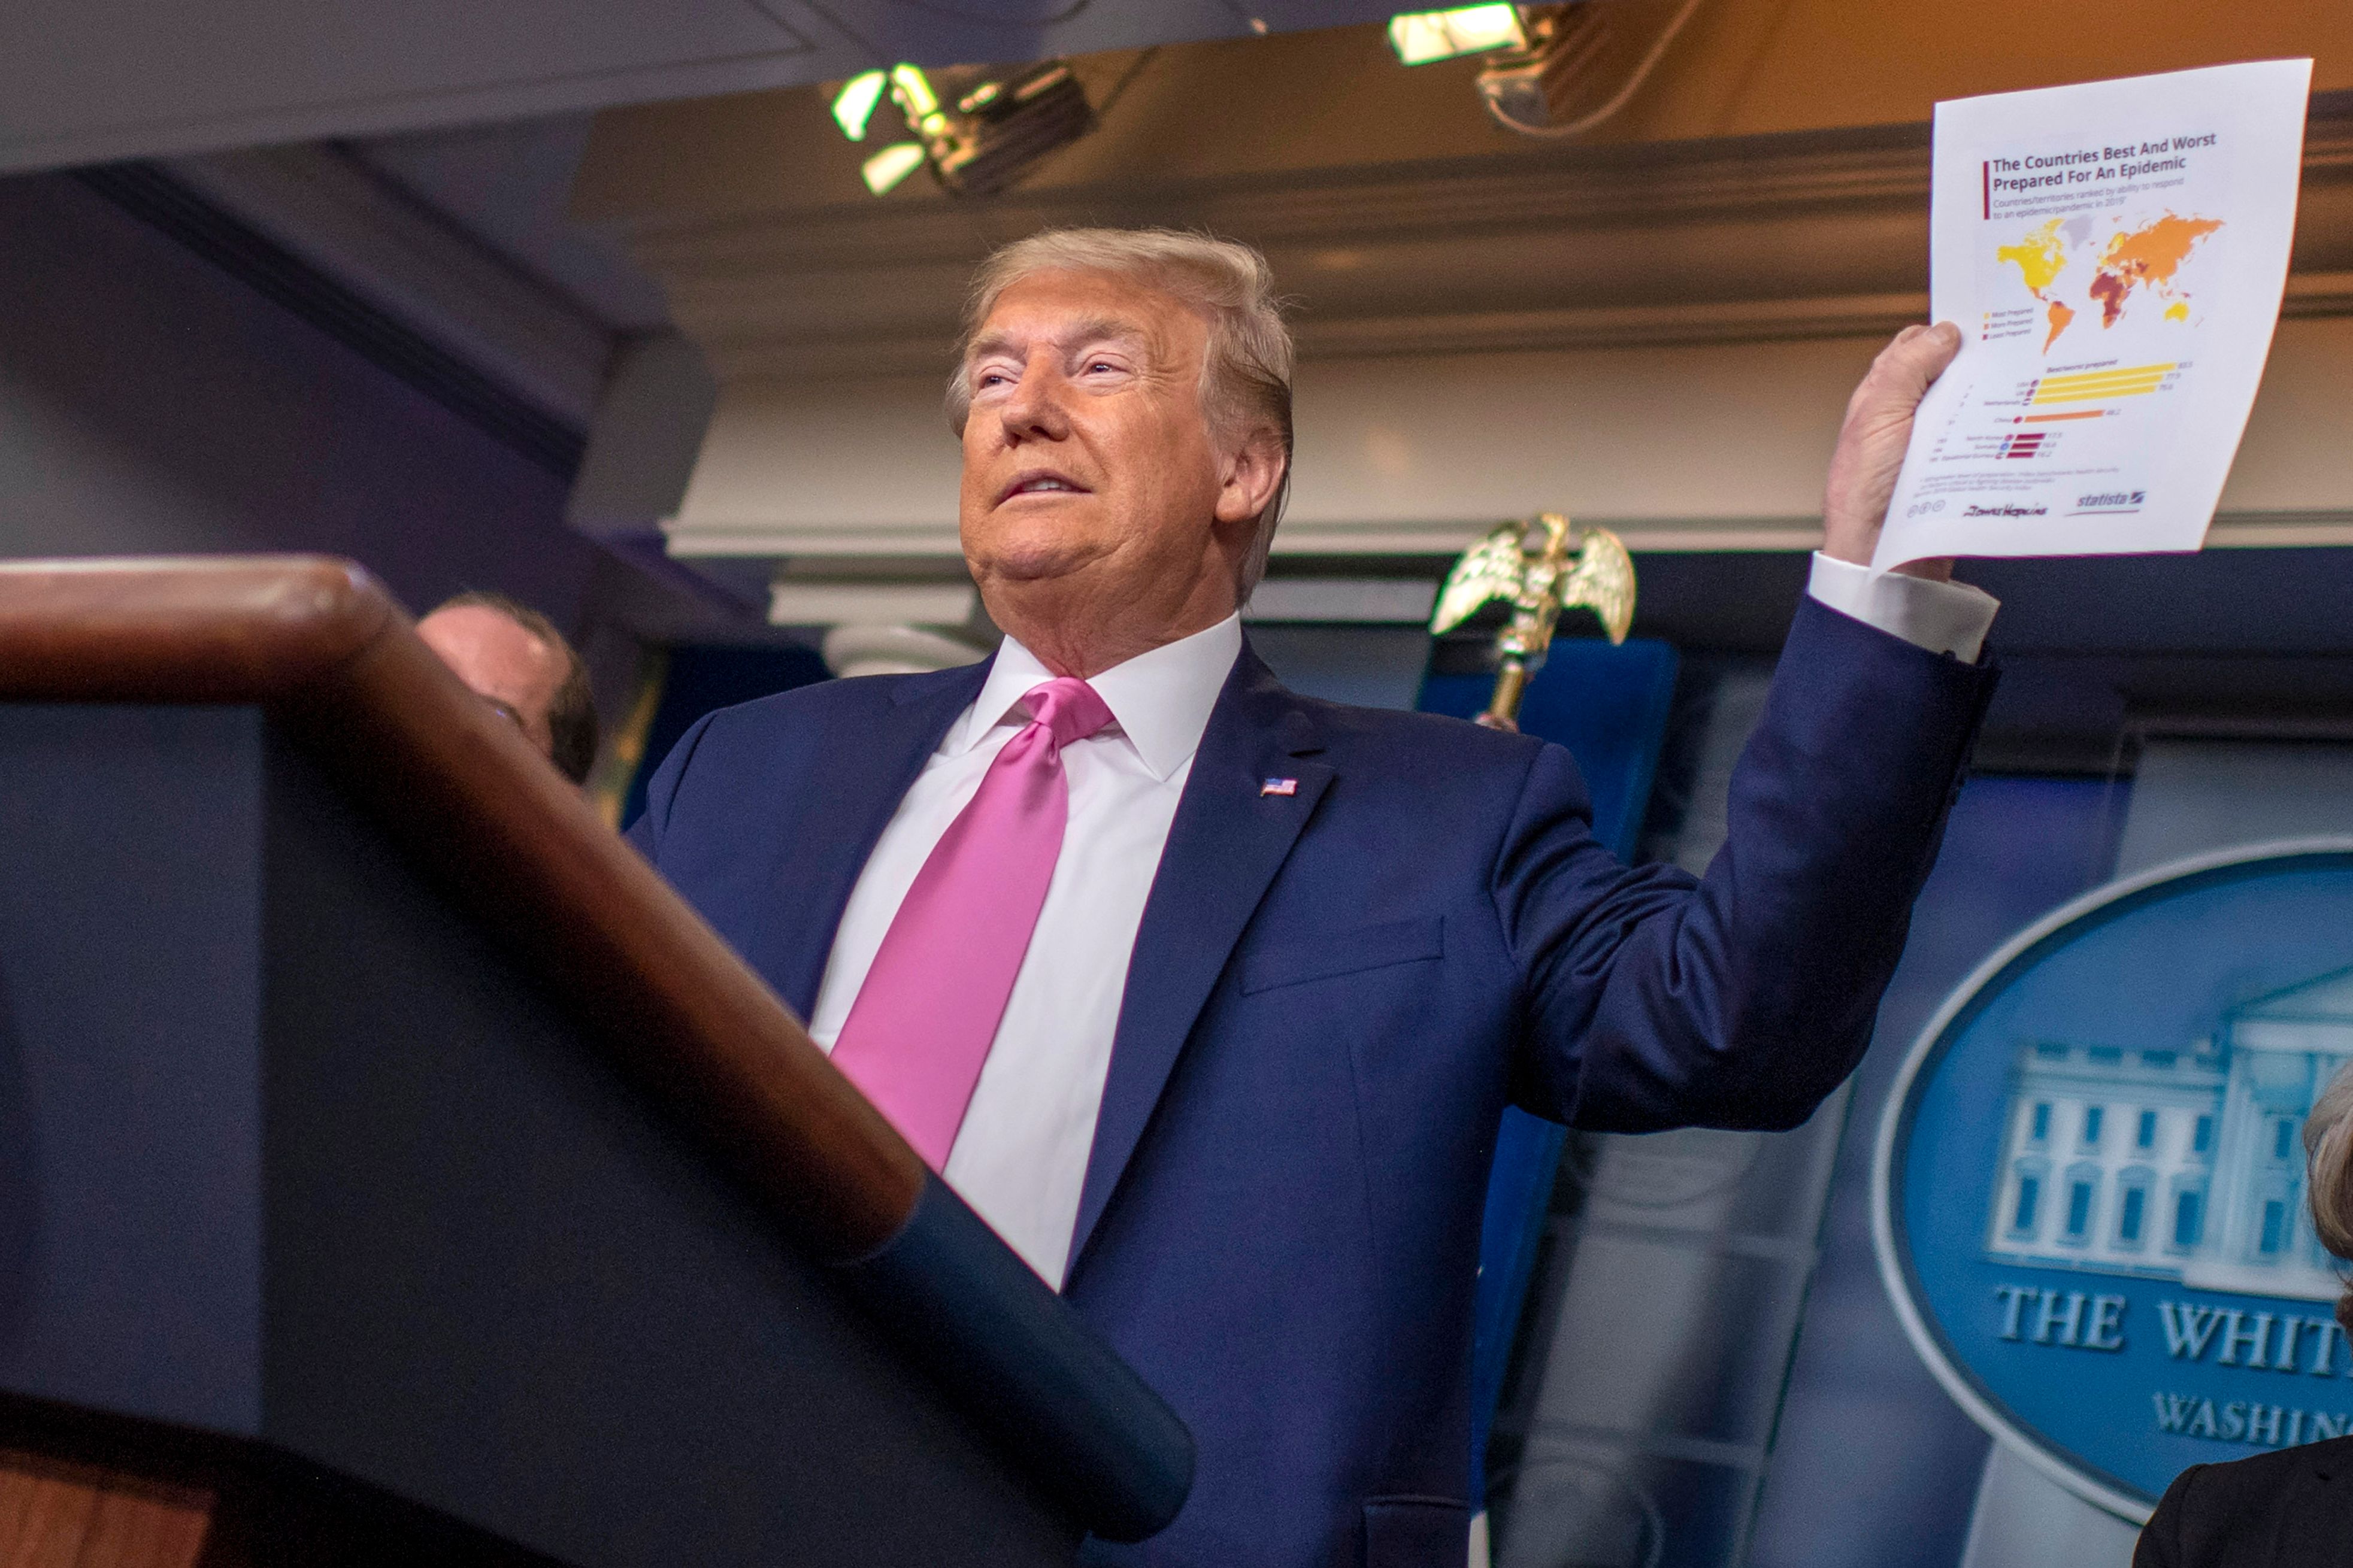 President Donald Trump holds up a document showing "countries best and worst prepared for an epidemic" during a news conference at the White House.